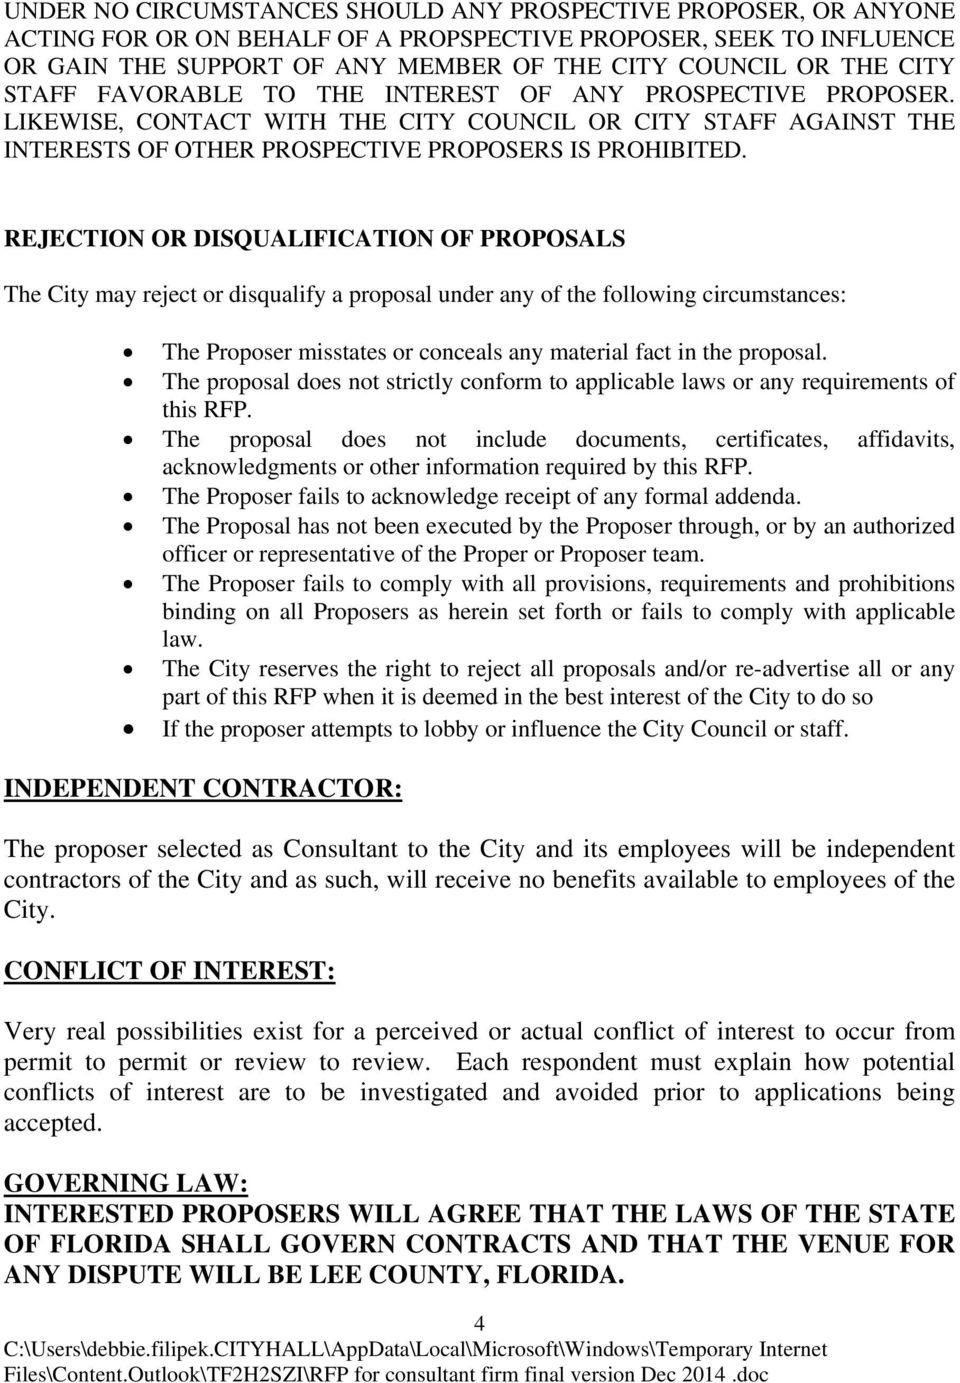 REJECTION OR DISQUALIFICATION OF PROPOSALS The City may reject or disqualify a proposal under any of the following circumstances: The Proposer misstates or conceals any material fact in the proposal.